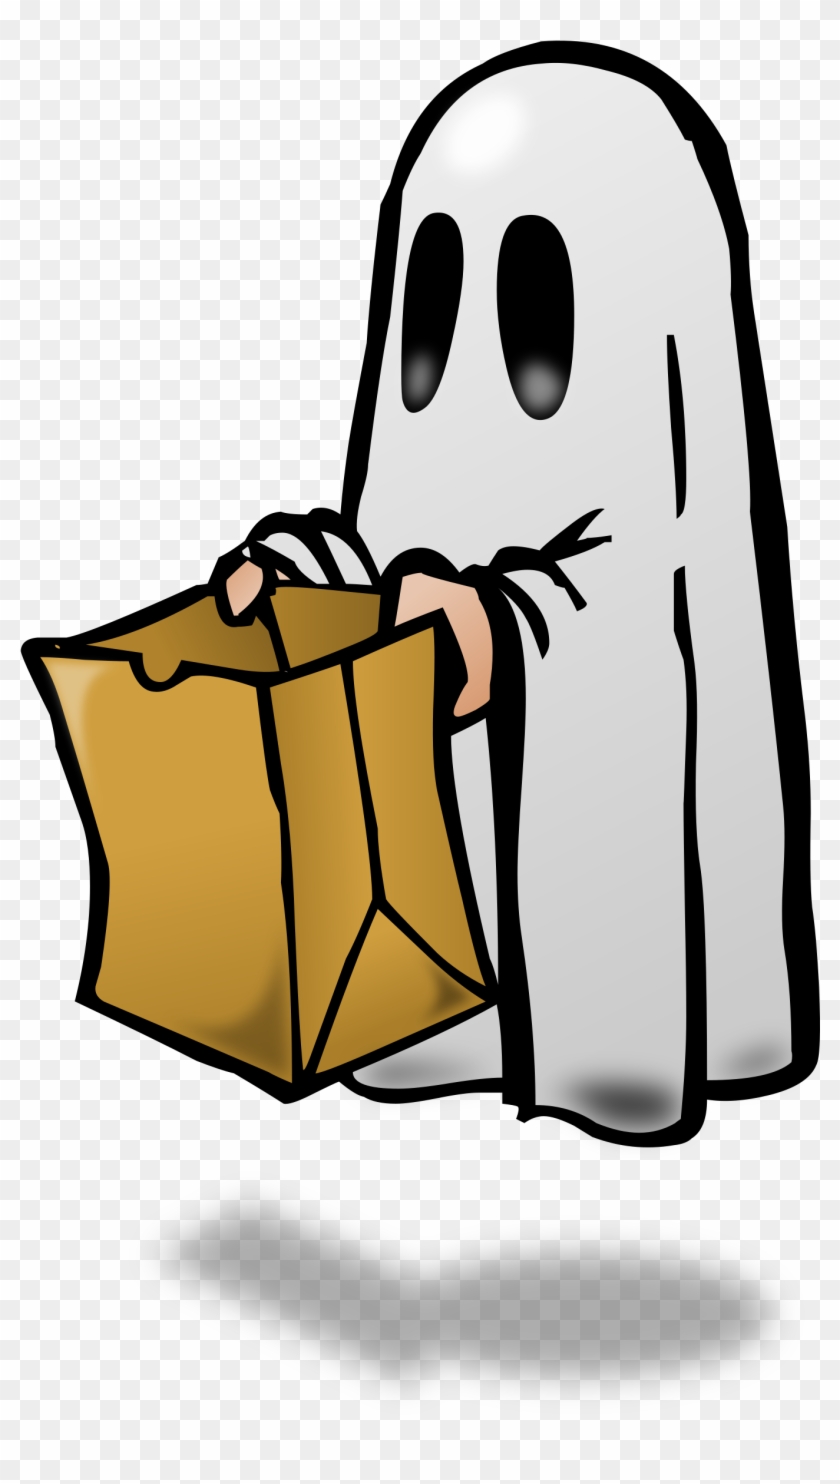 Trunk Or Treat Ghost Trick Or Treat Vector Clipart - Ghost Trick Or Treat #99141